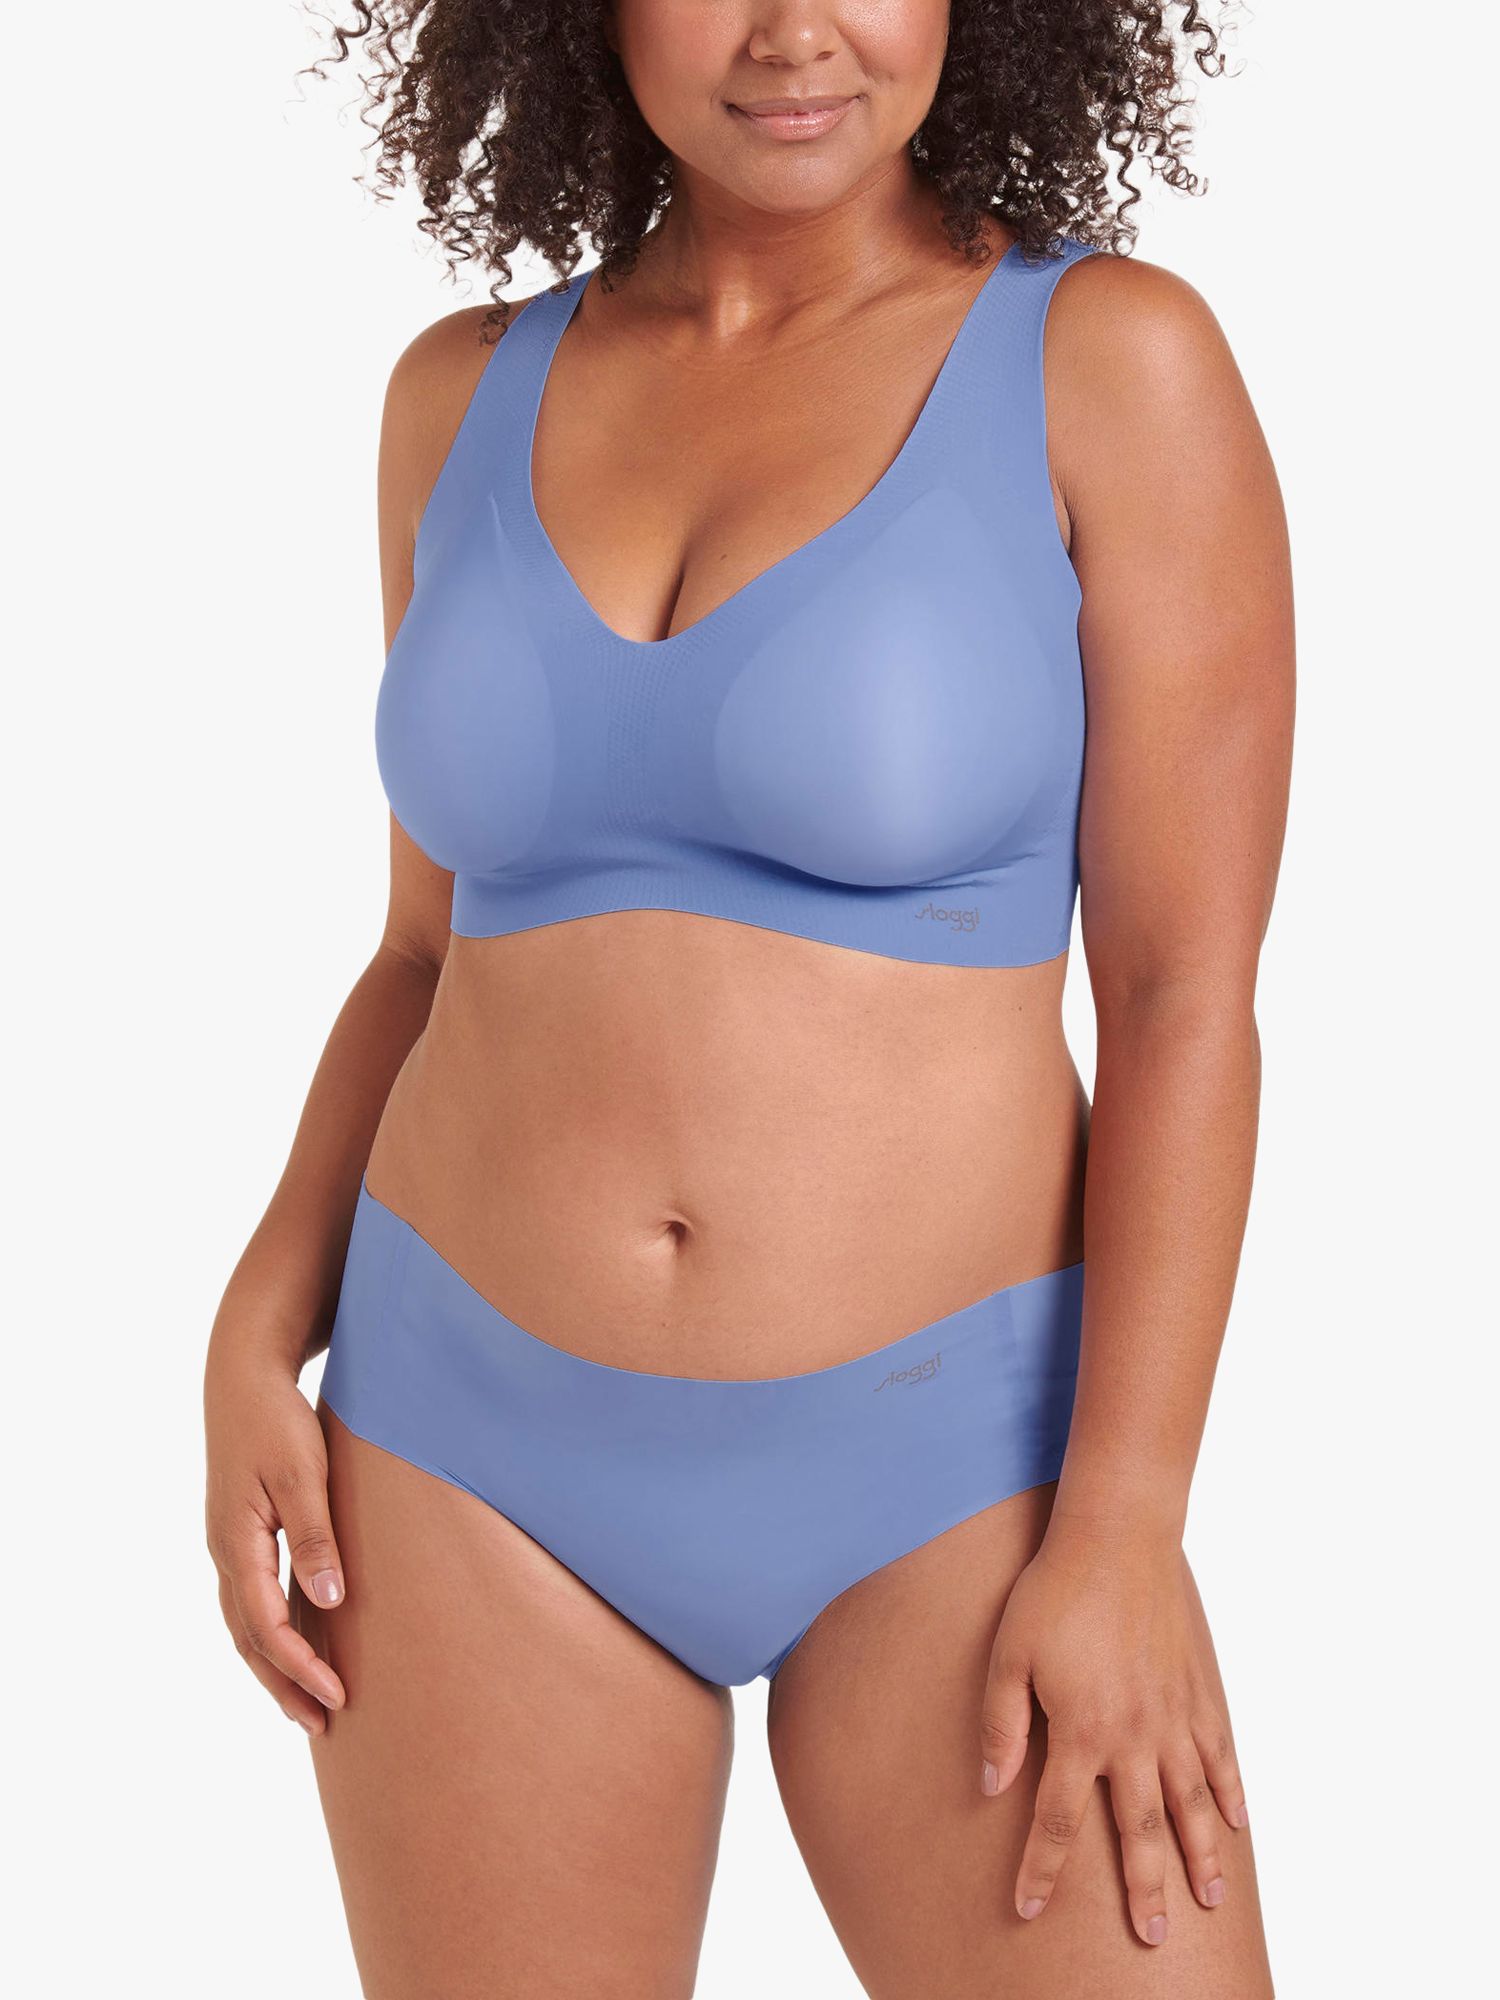 Sloggi Zero Feel Bra And Zero Feel Hipsters Review – What's Good To Do